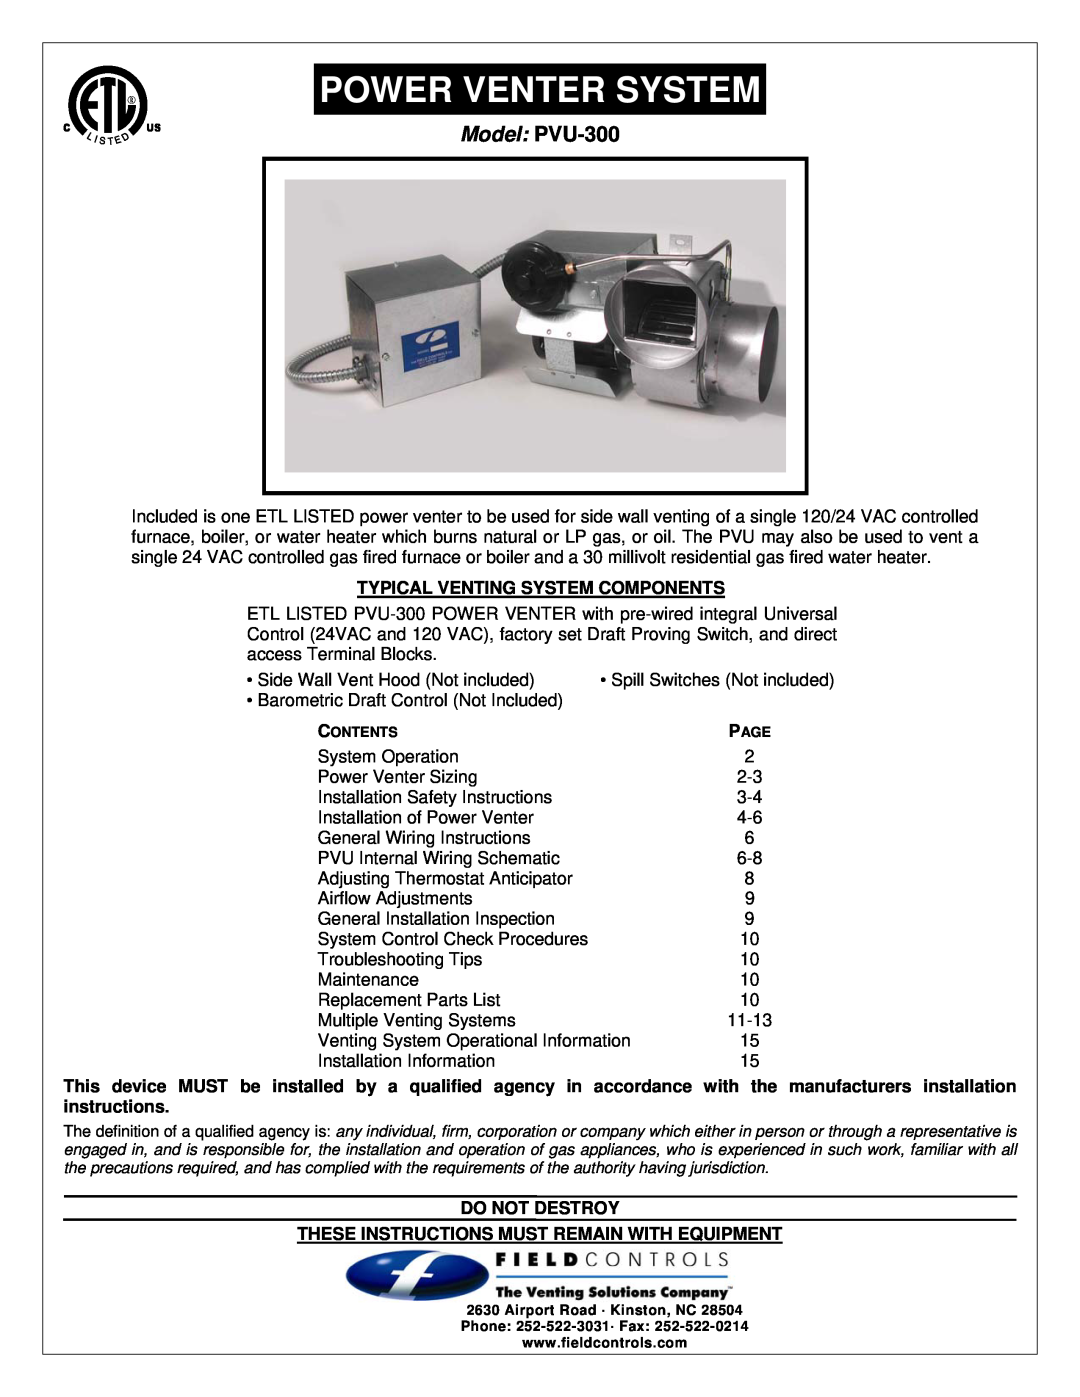 Field Controls PVU-300 installation instructions Typical Venting System Components, Do Not Destroy, Power Venter System 